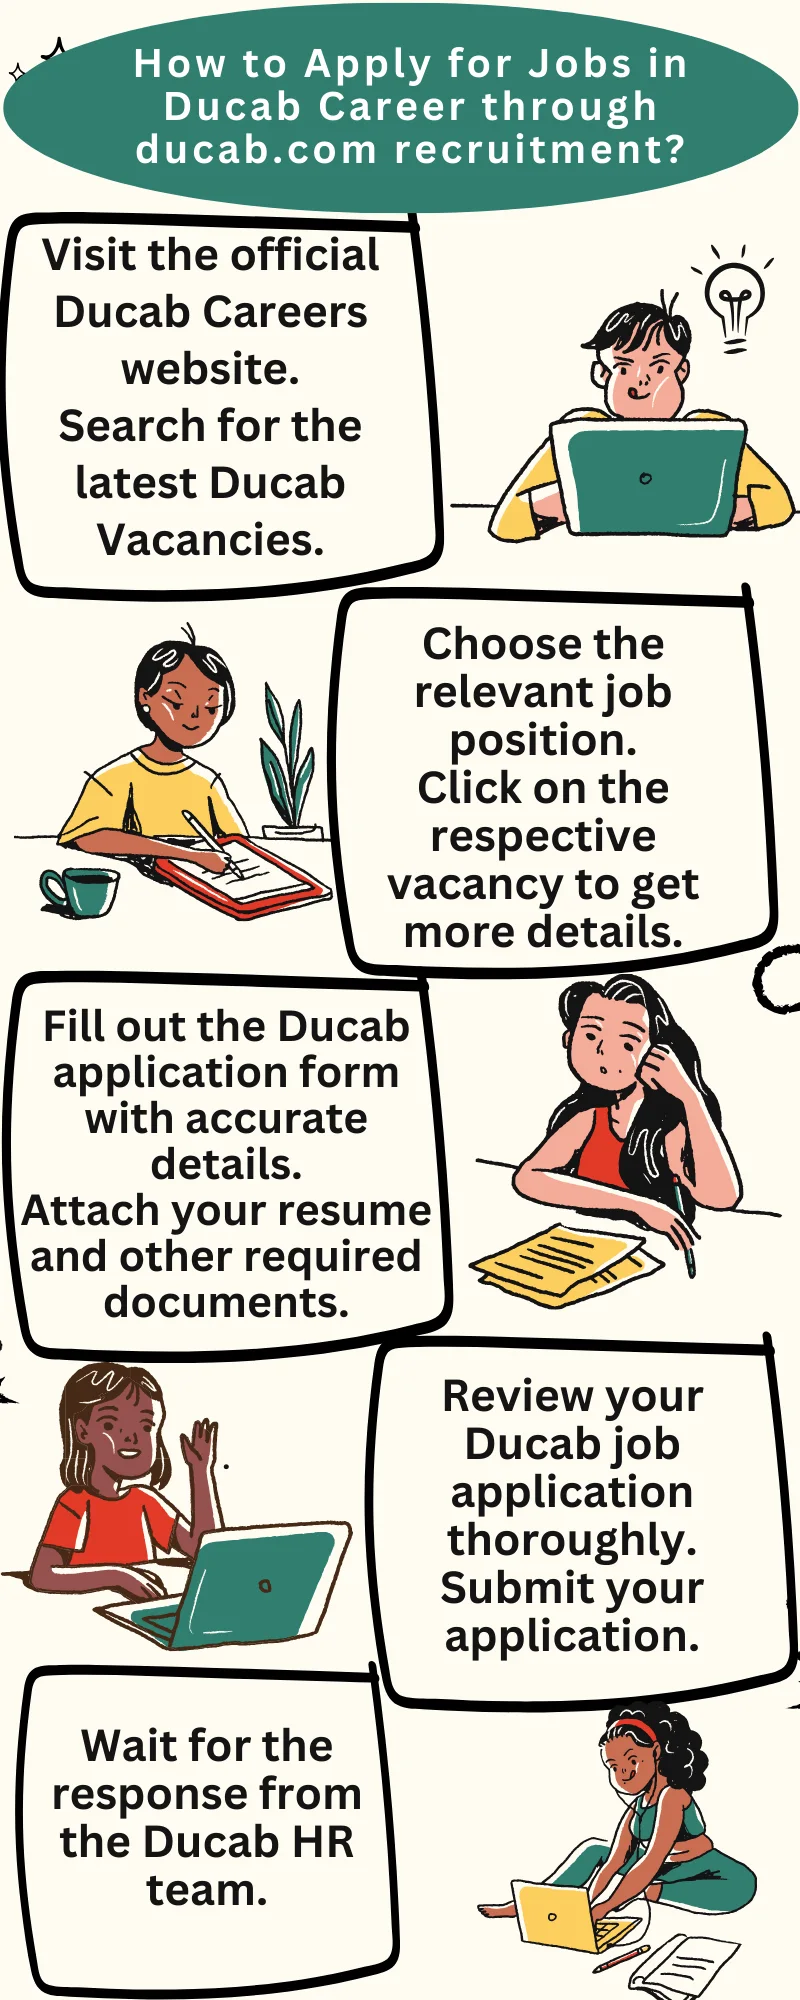 How to Apply for Jobs in Ducab Career through ducab.com recruitment?